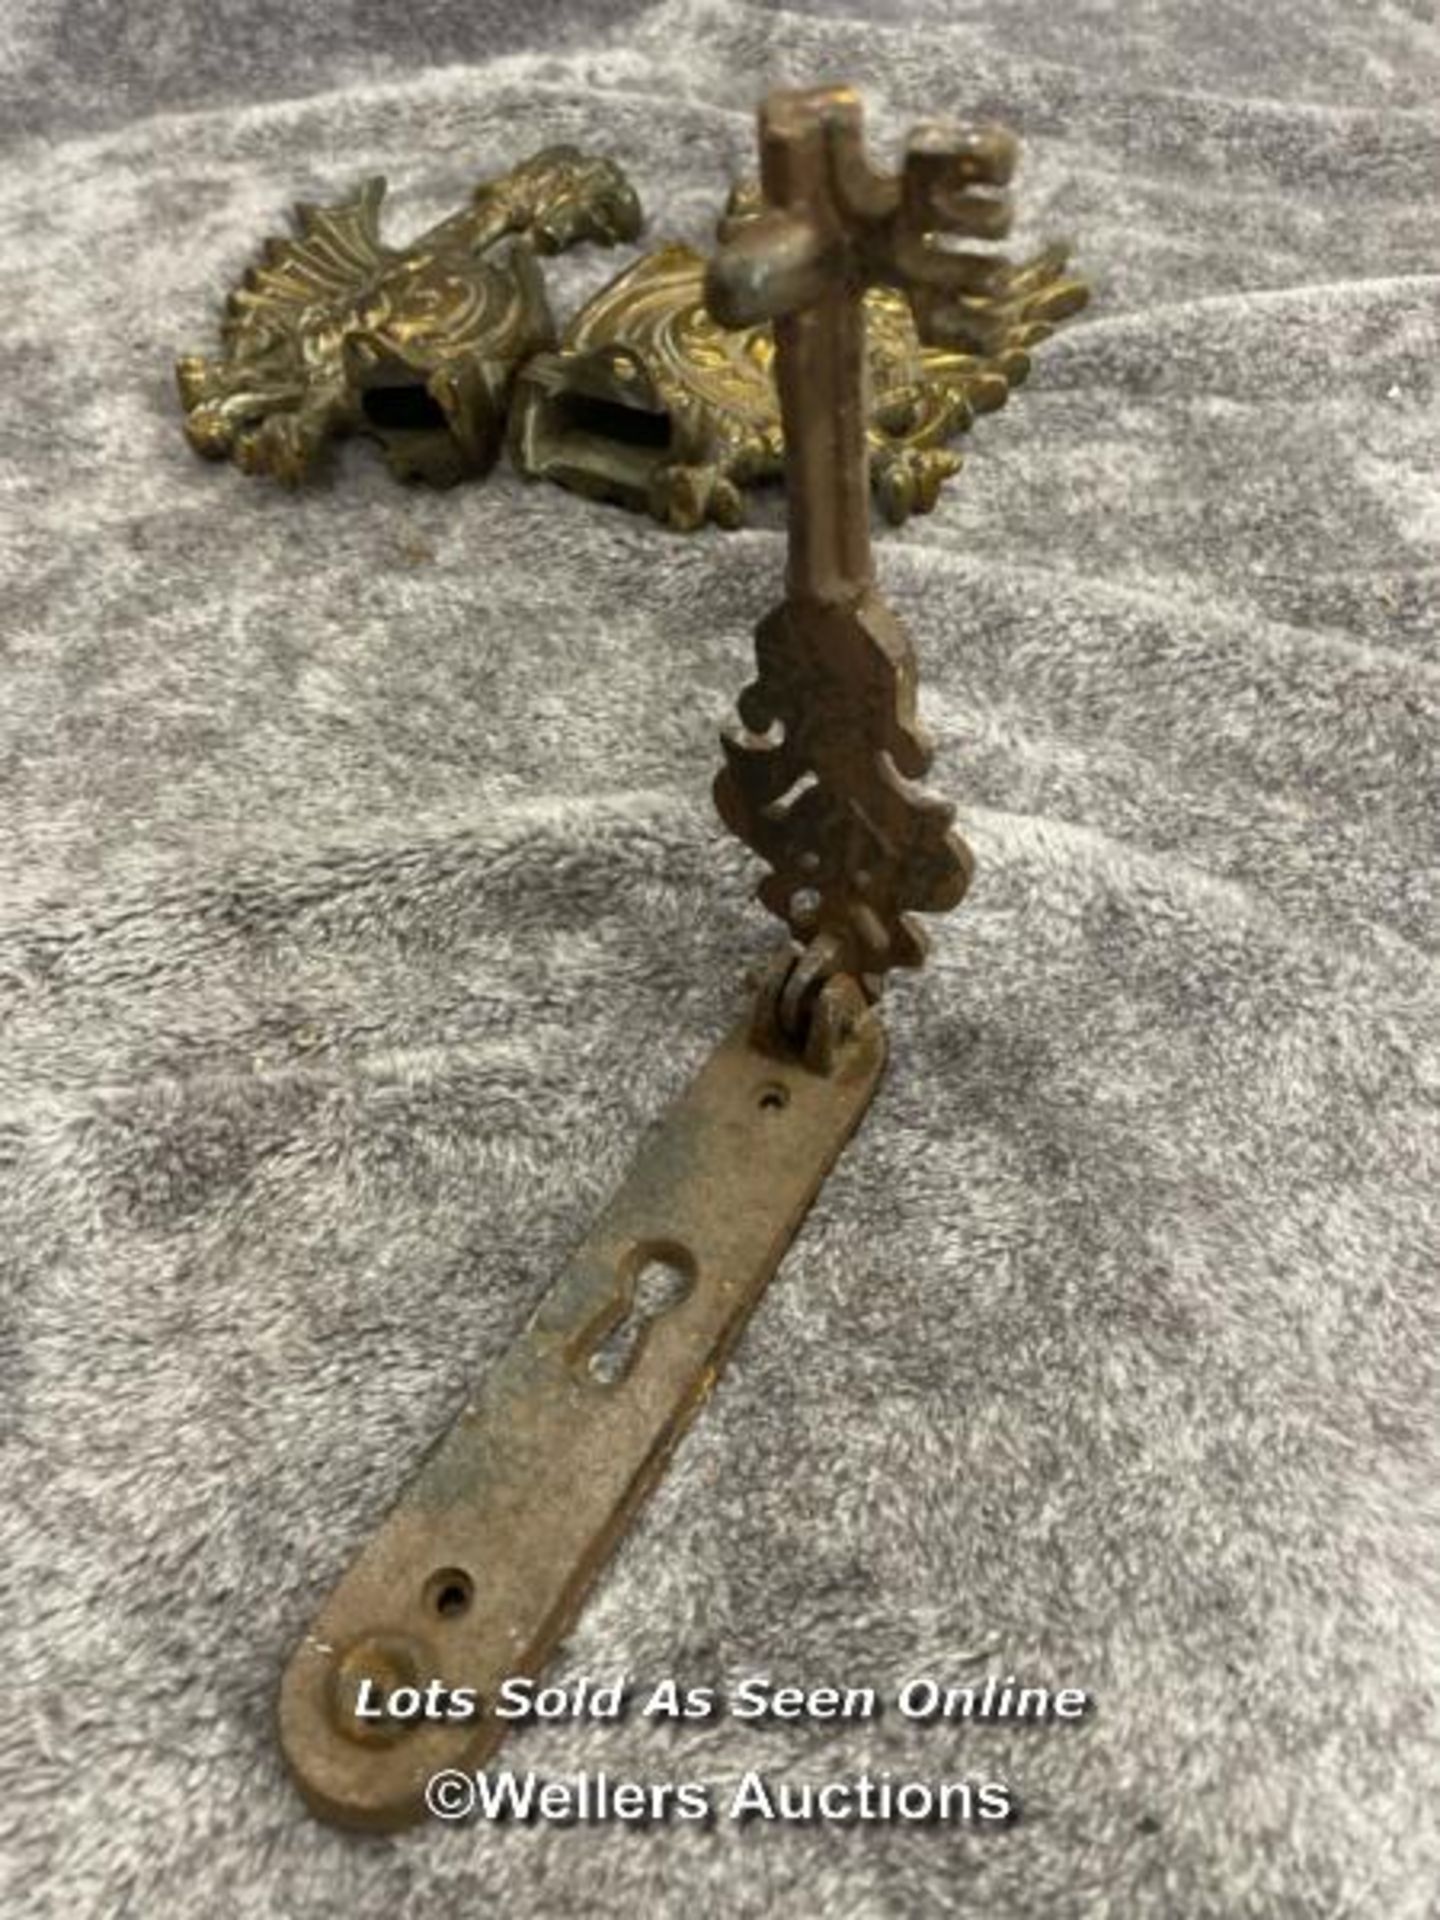 A pair of brass door fixtures in form of a dragon and one other iron door knocker, dragons 20cm high - Image 6 of 6